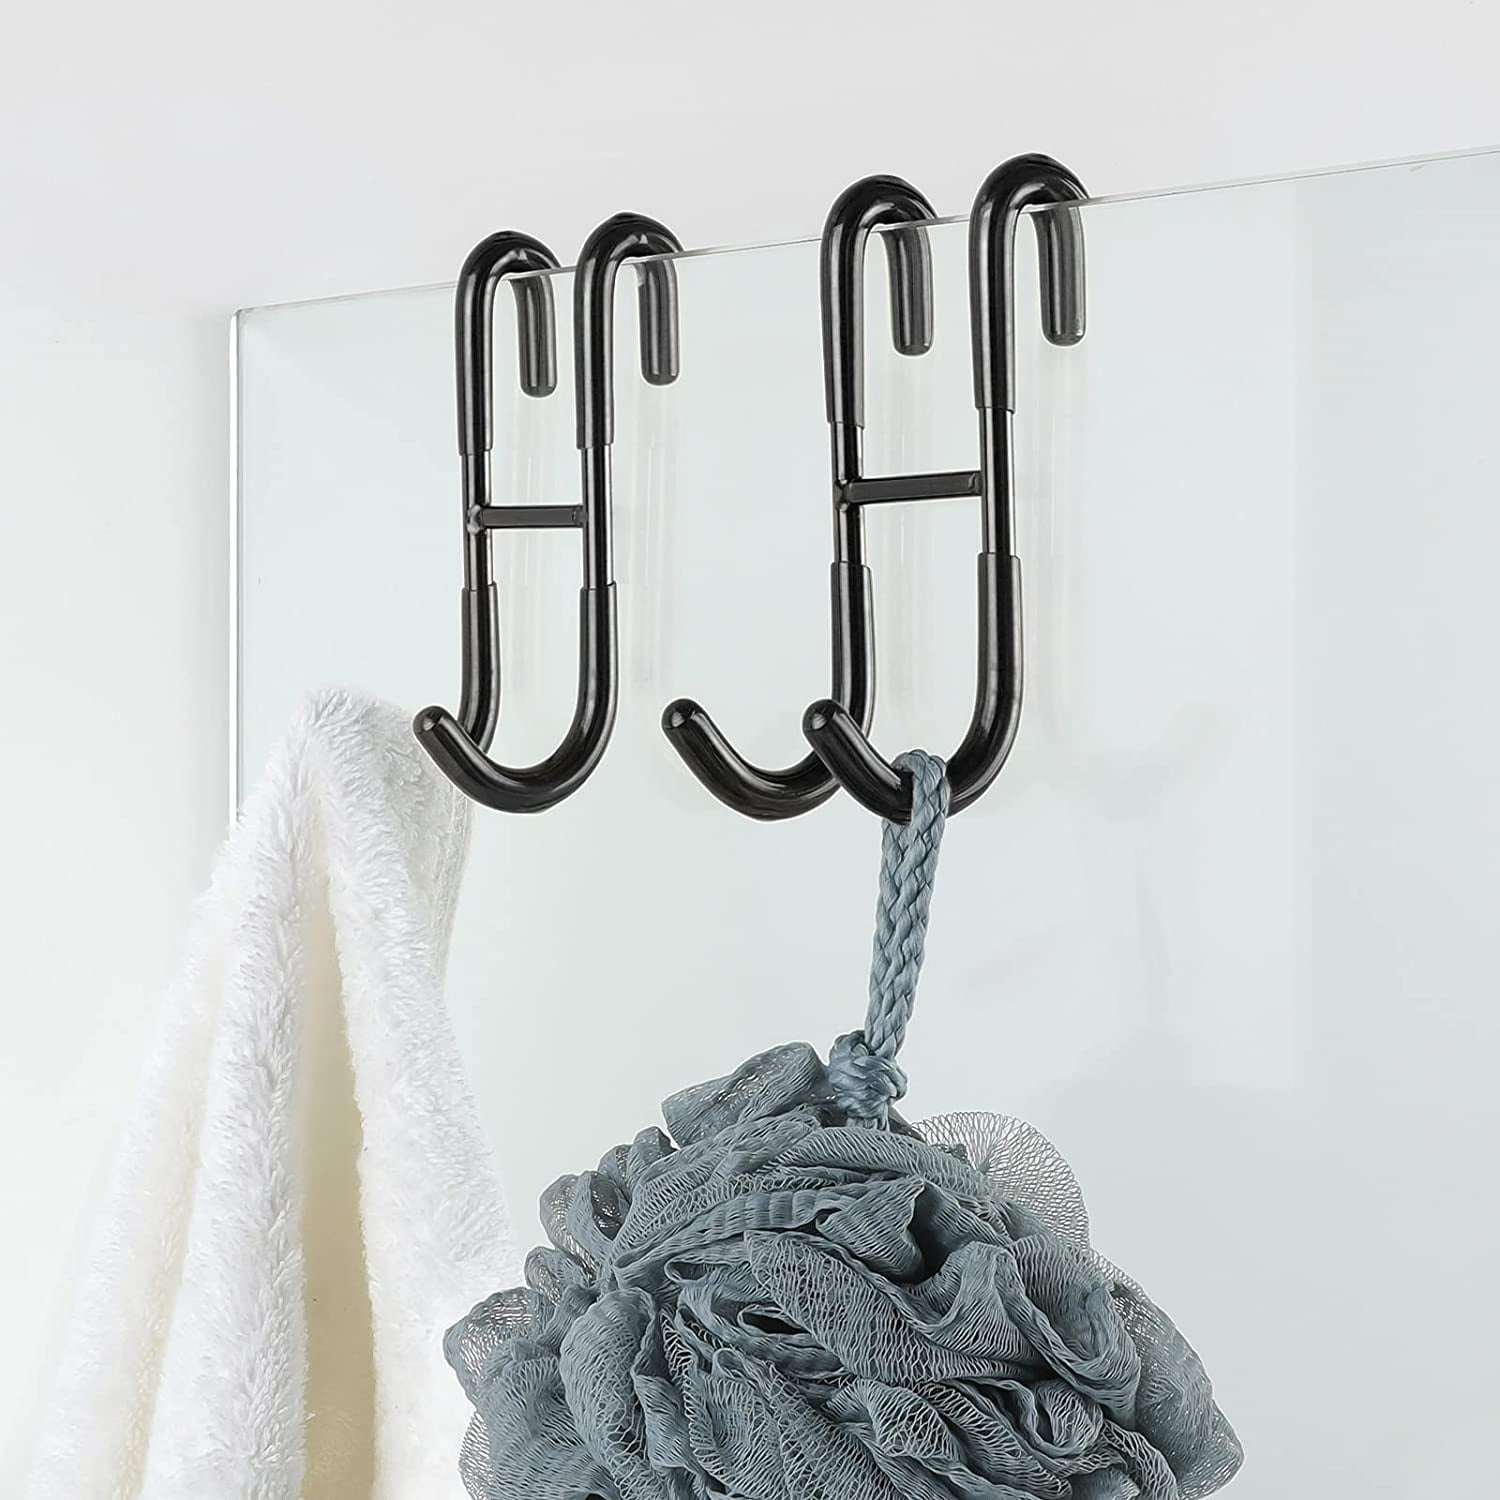 2 Pieces Shower Hook, Shower Enclosure Wall Hook, No Drilling Towel Hook,  Bathroom Door Hooks, Fit 6-12mm Thick Glass, Brushed Stainless Steel,4.2*18*